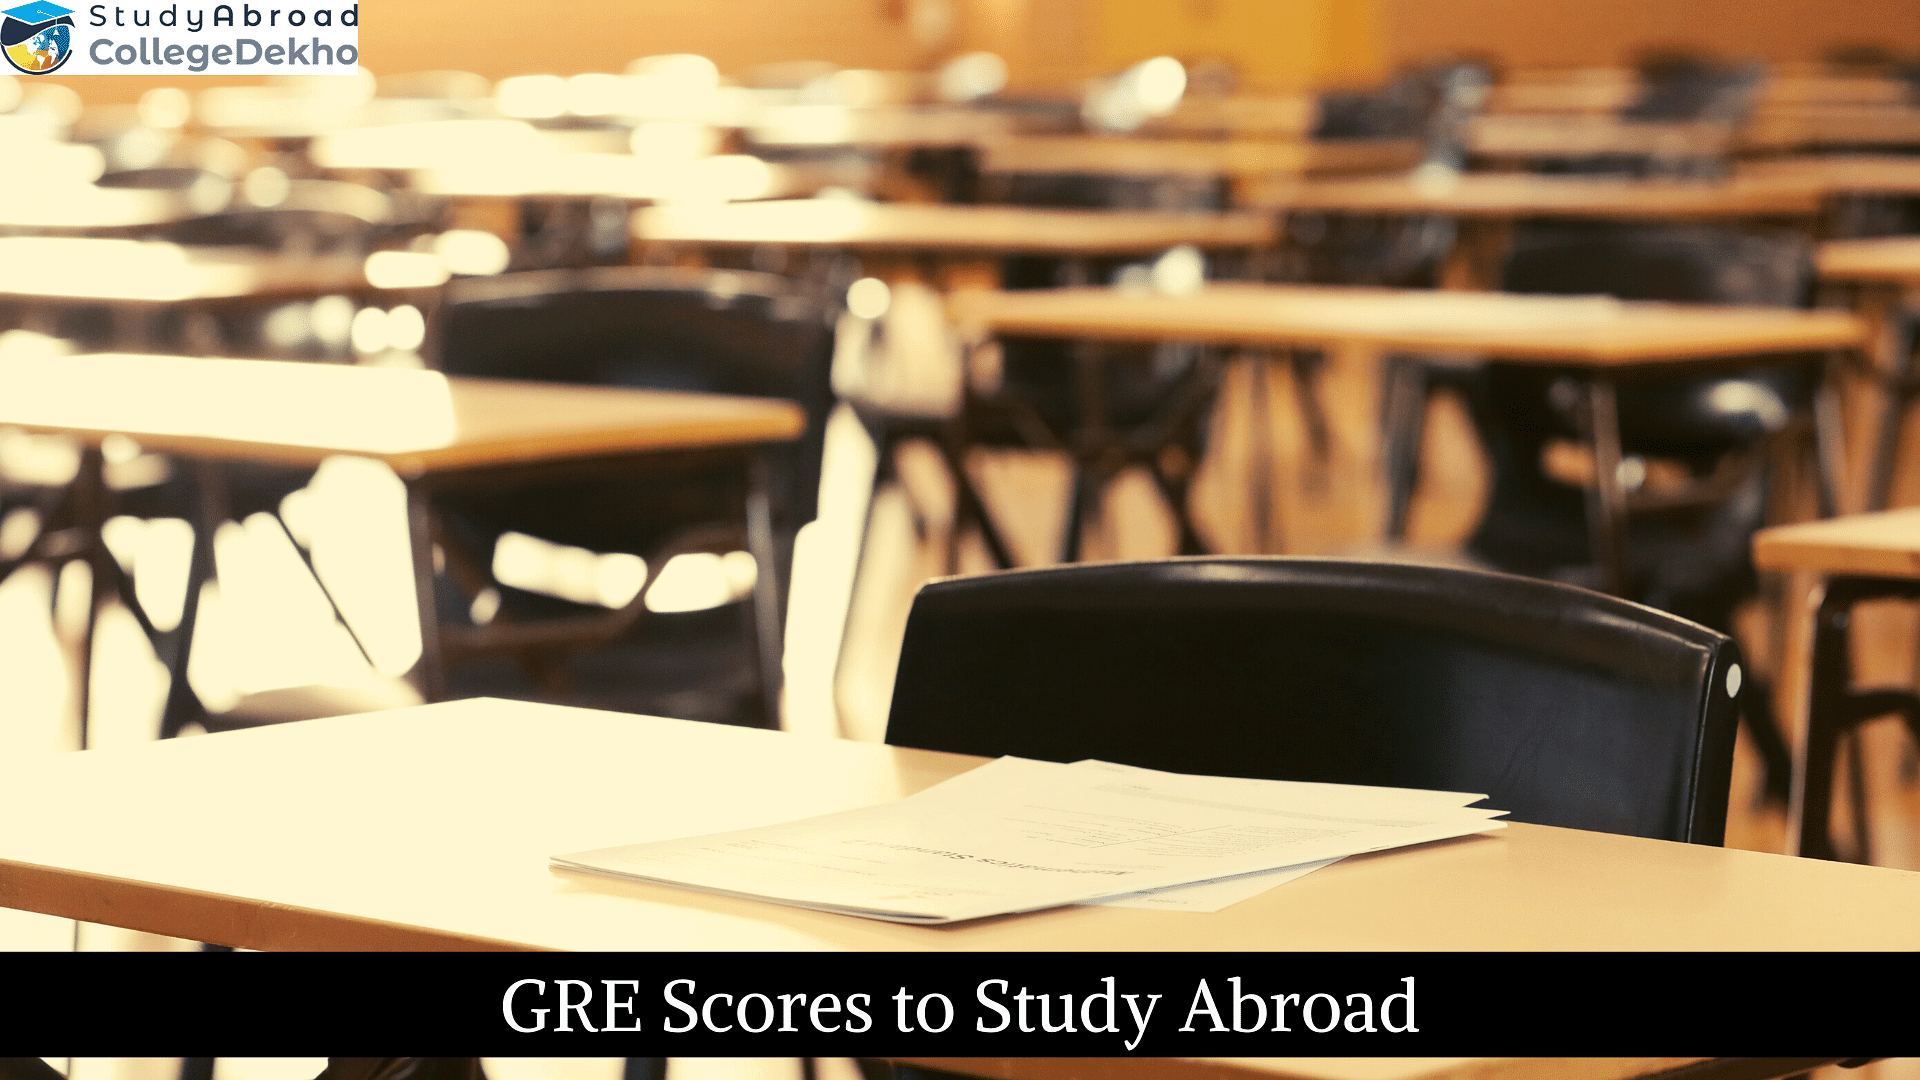 GRE Scores to Study Abroad